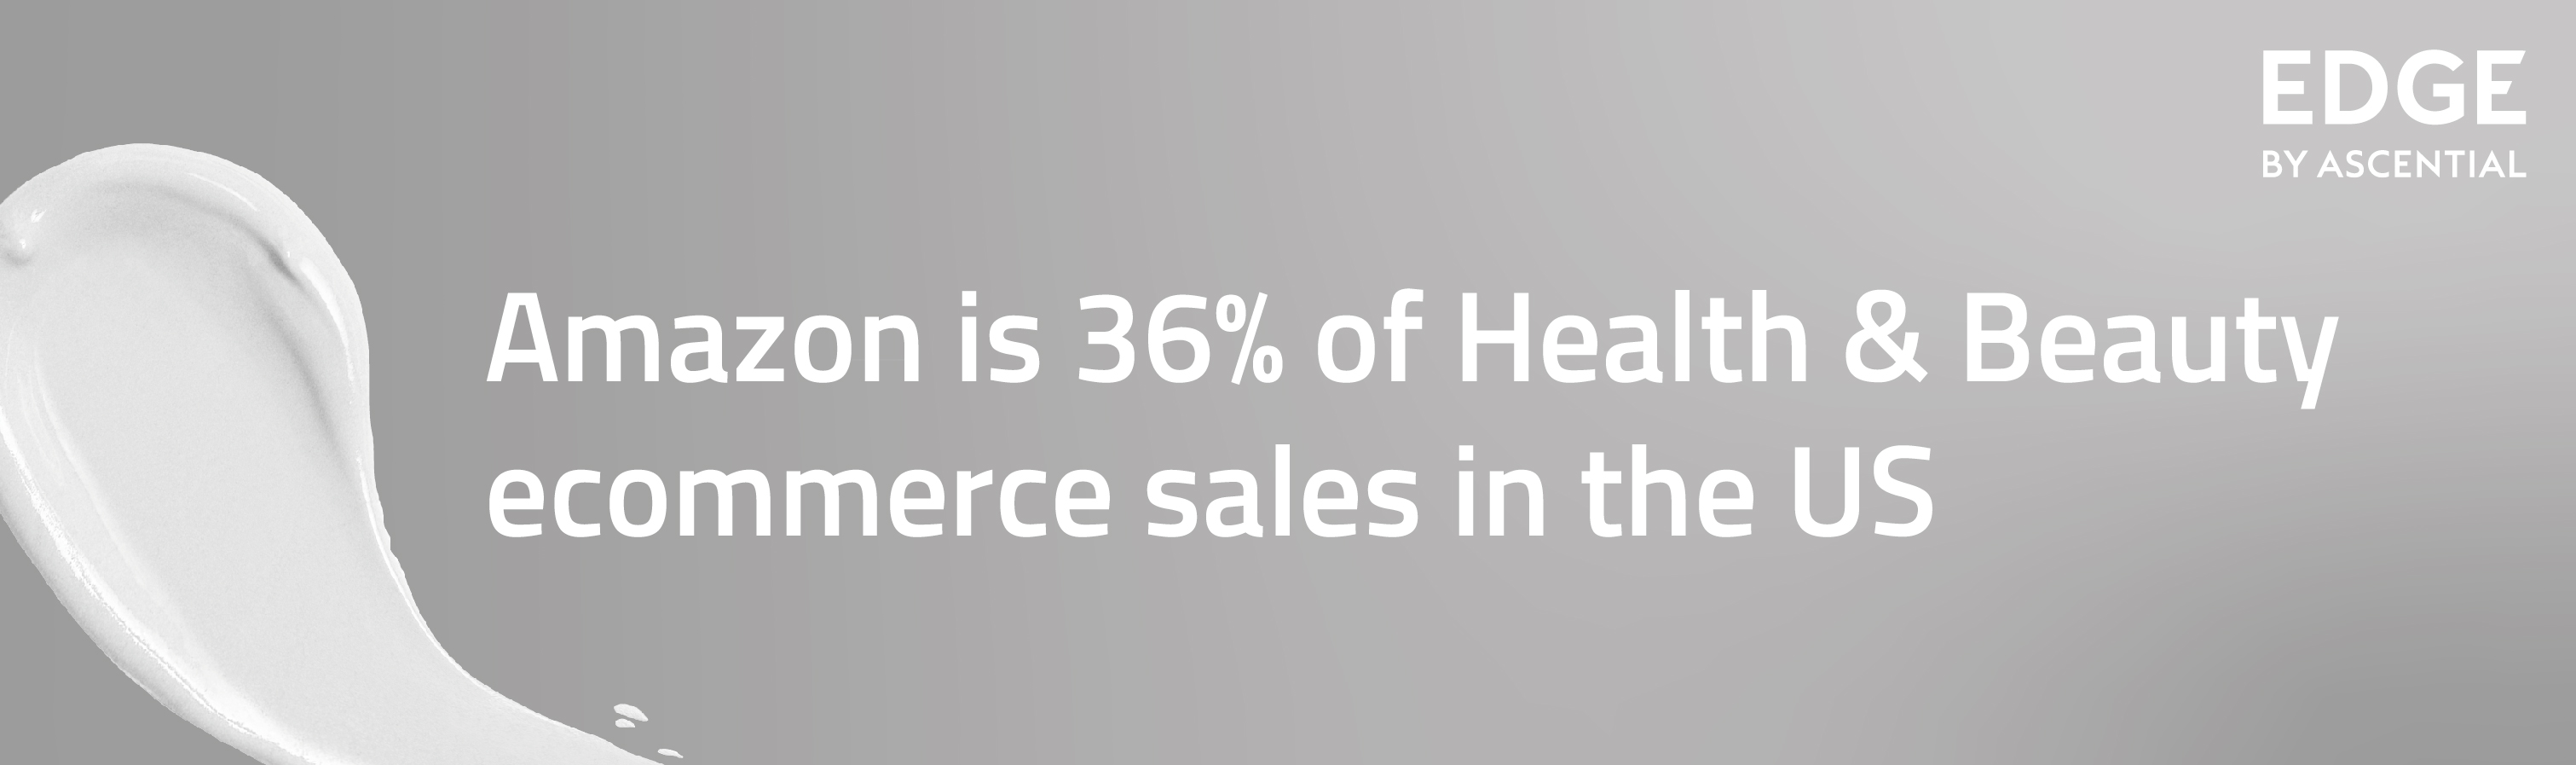 Amazon is 36% of Health & Beauty ecommerce sales in the US